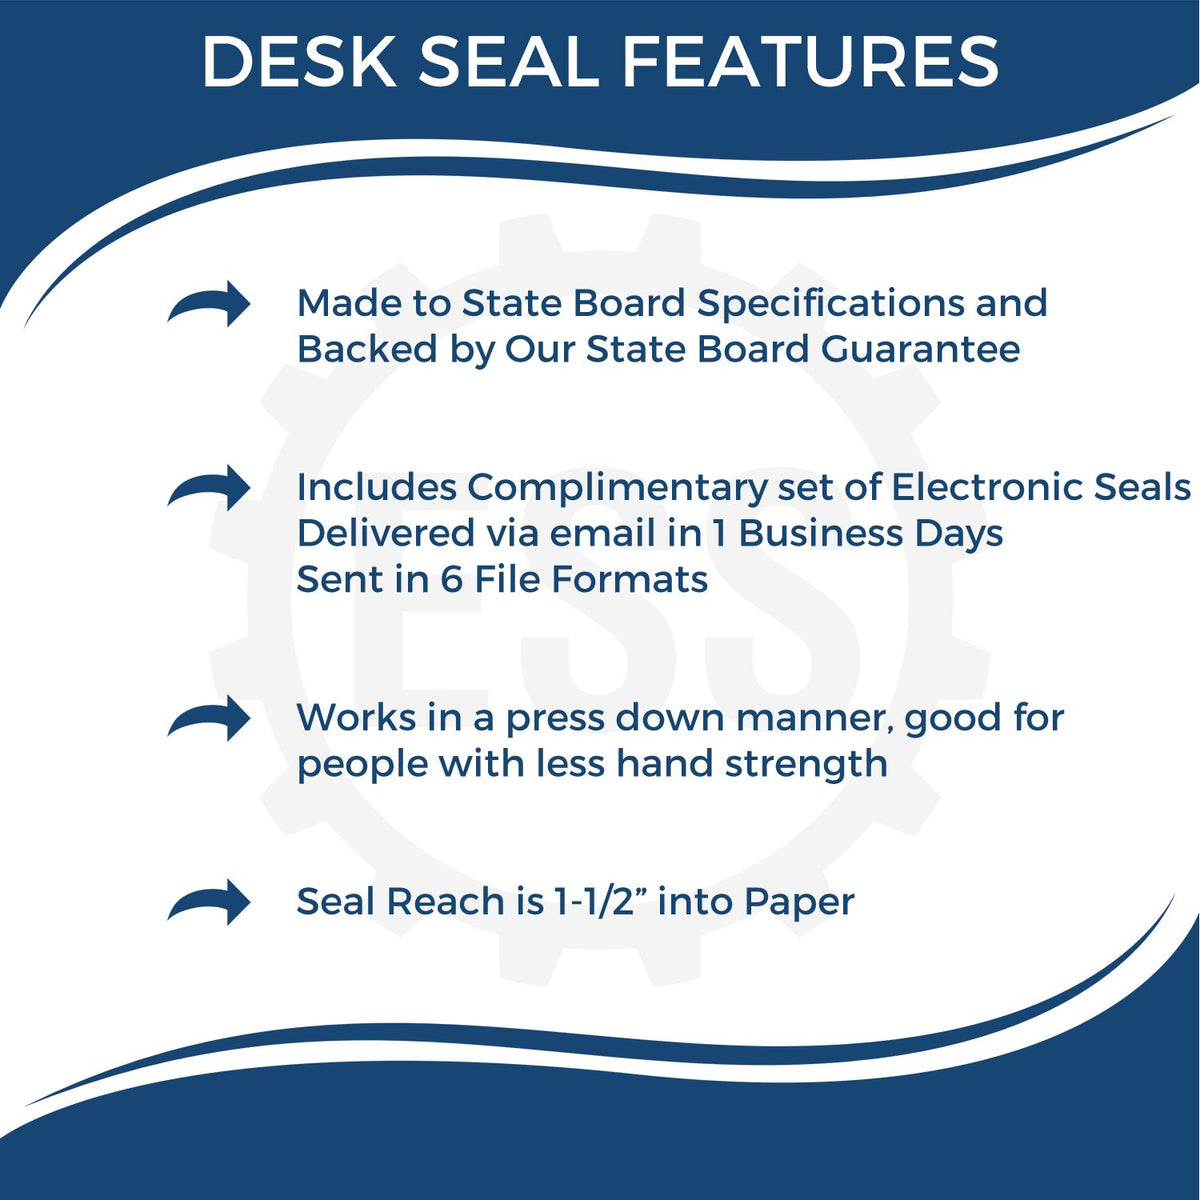 A picture of an infographic highlighting the selling points for the Delaware Desk Surveyor Seal Embosser